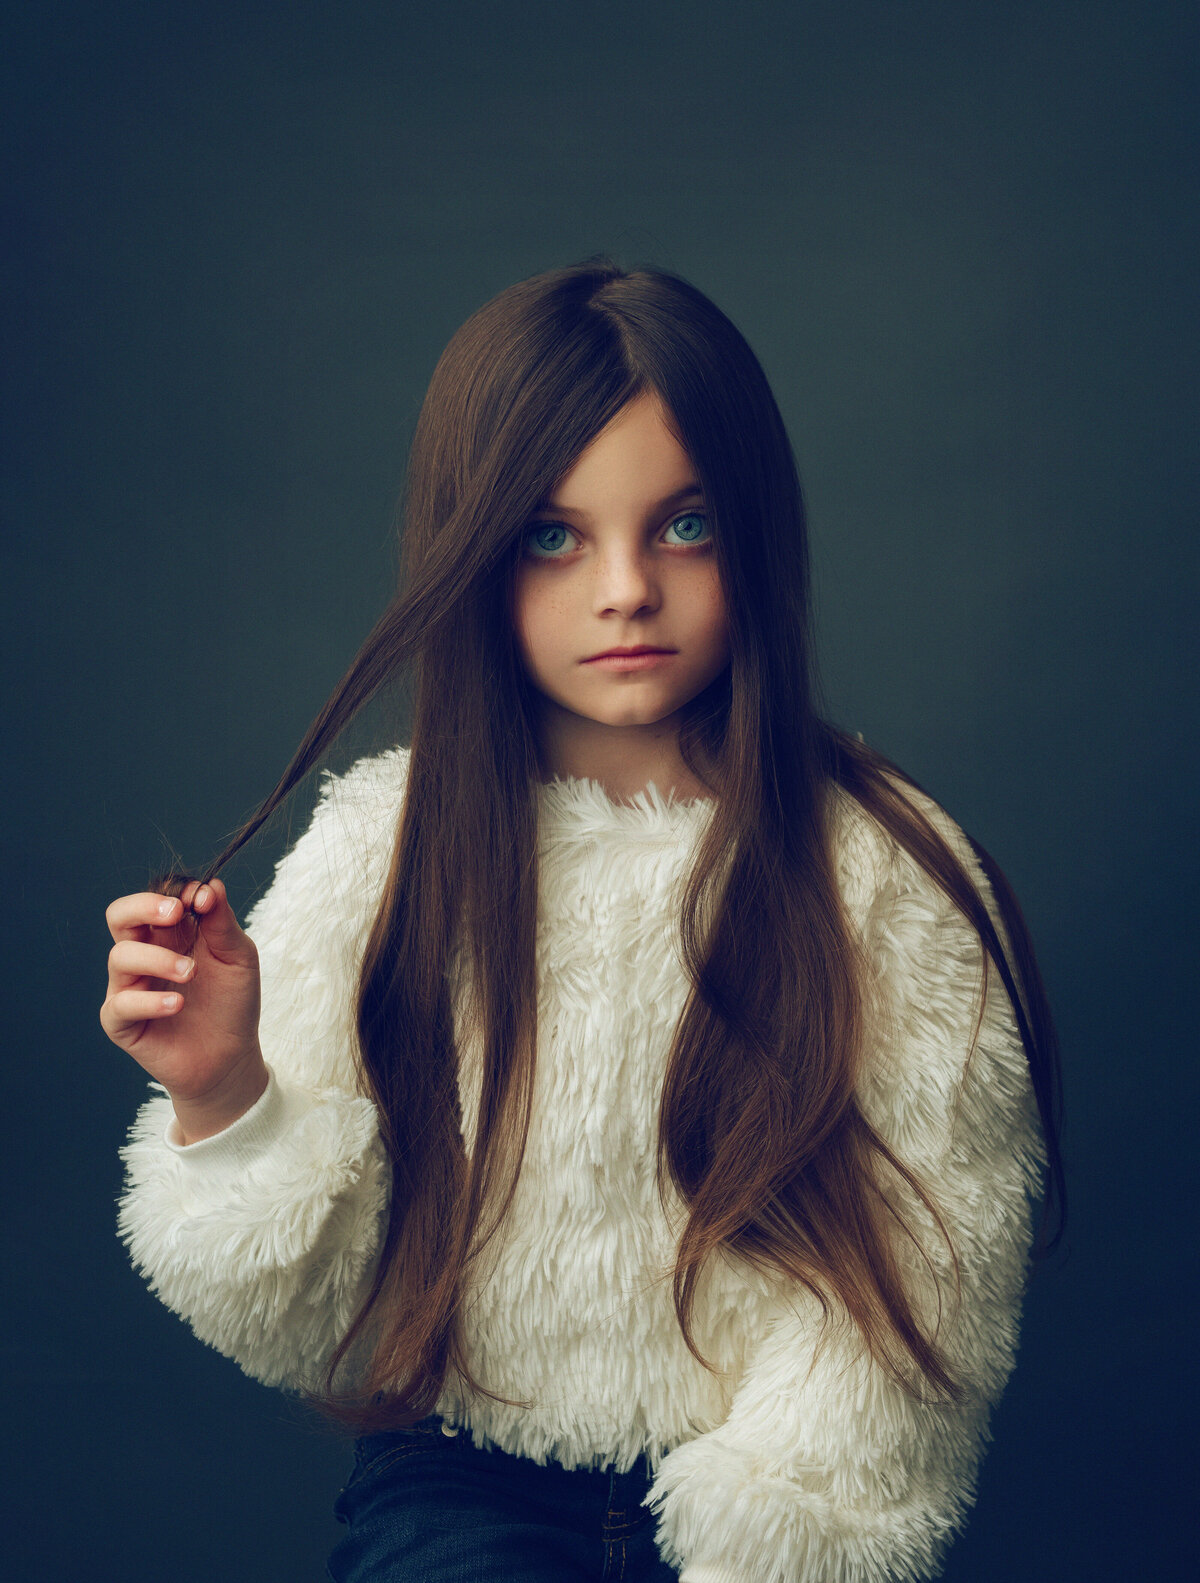 Portrait of a young girl, looking camera center and holding her hair between her fingers.